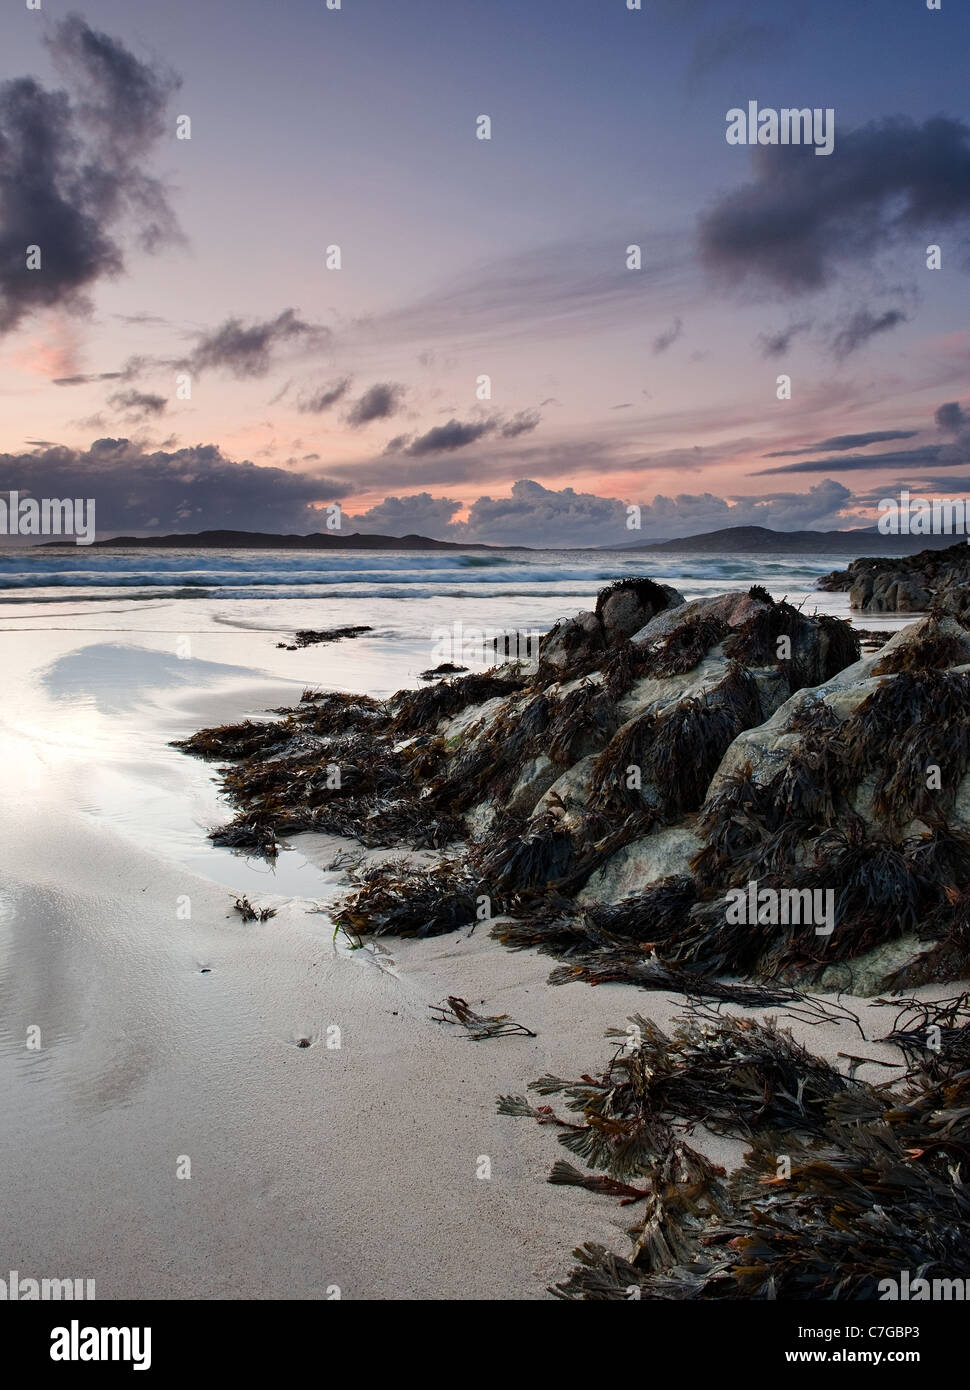 Sunset at Traigh Burgh on the island of South Harris in the Outer Hebrides Stock Photo